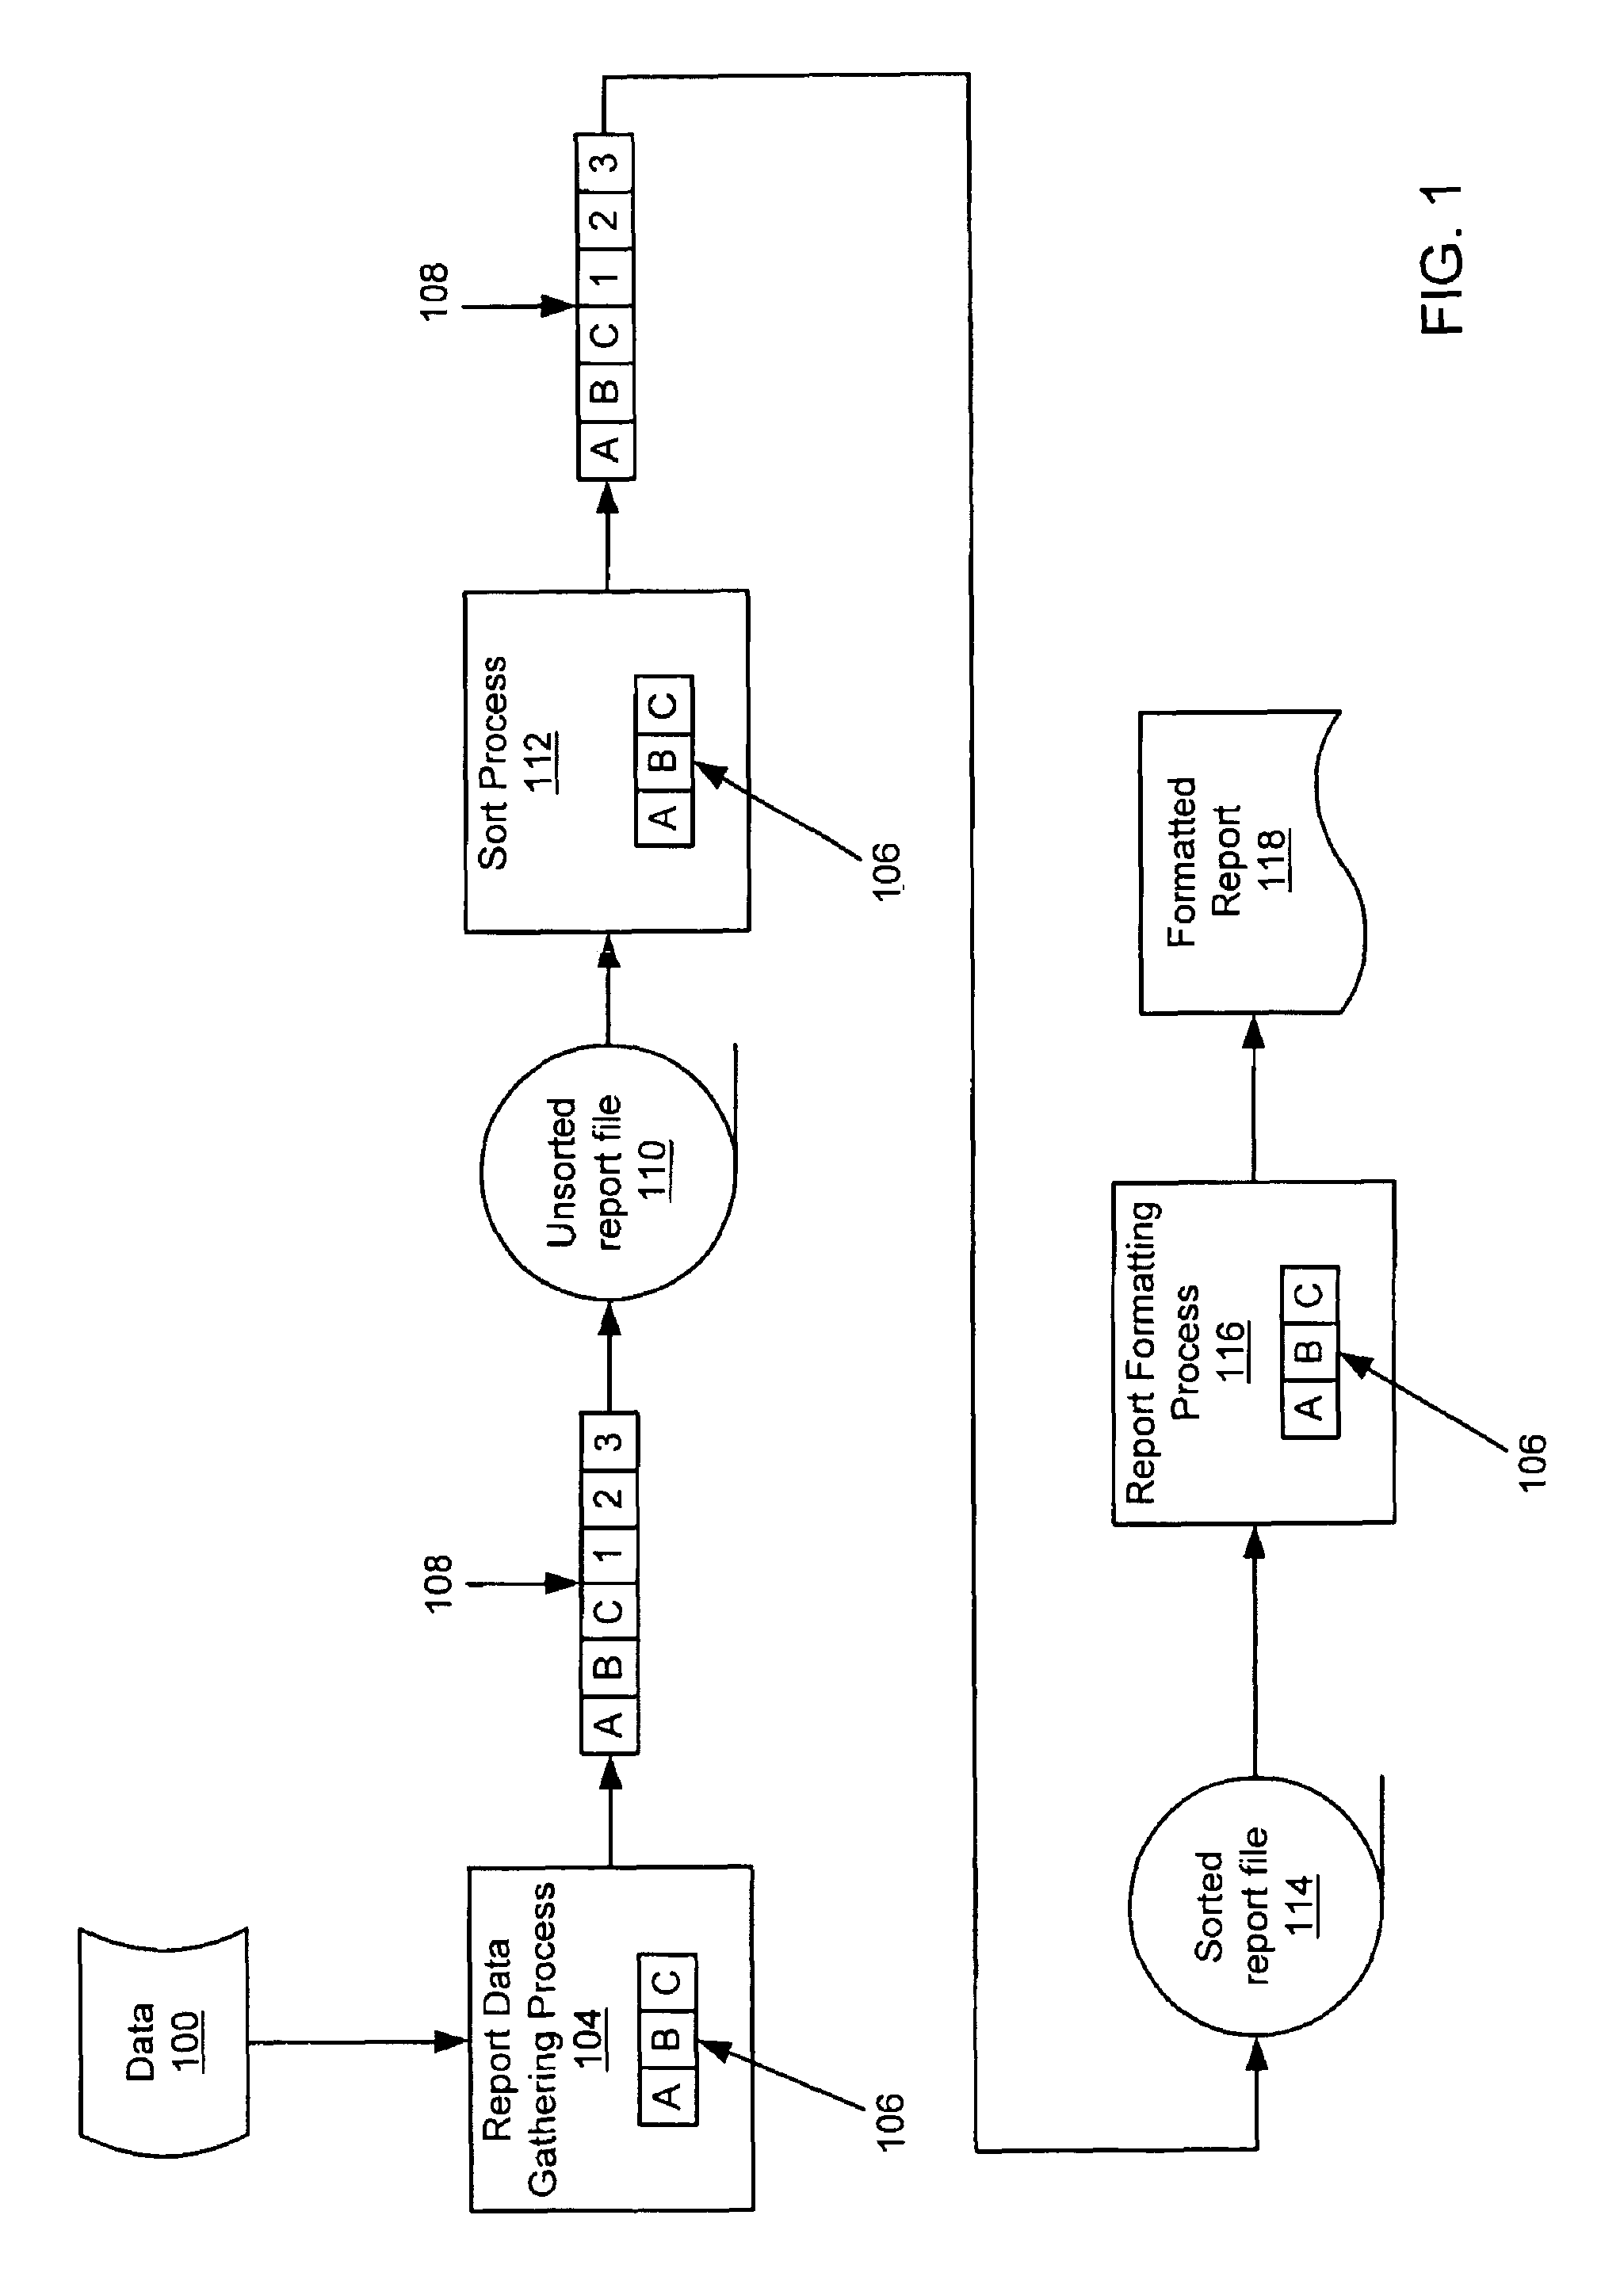 Configuring systems for generating business transaction reports using processing relationships among entities of an organization